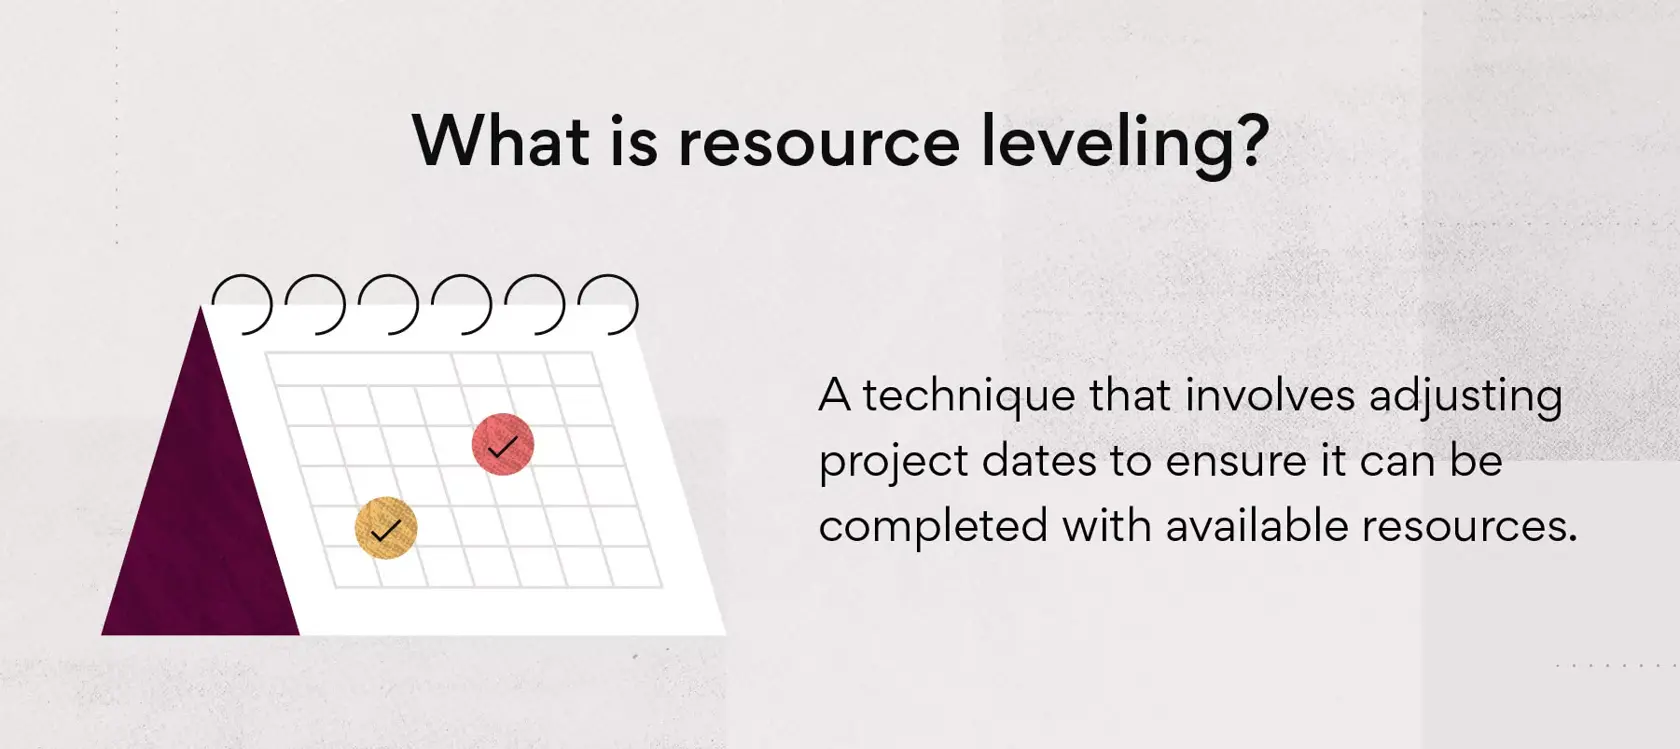 [inline illustration] What is resource leveling? (infographic)